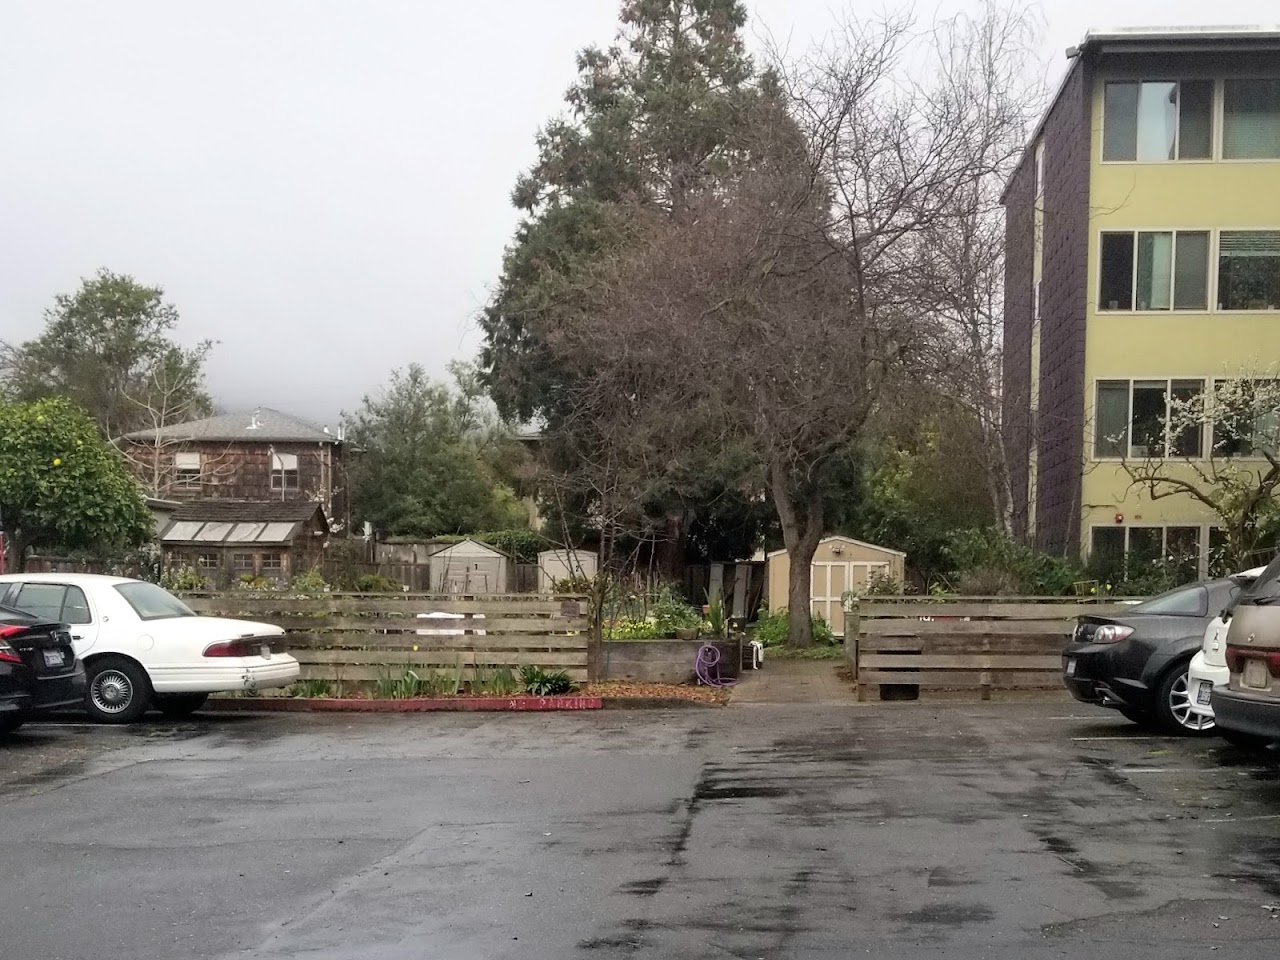 Photo of STRAWBERRY CREEK LODGE. Affordable housing located at 1320 ADDISON STREET BERKELEY, CA 94702